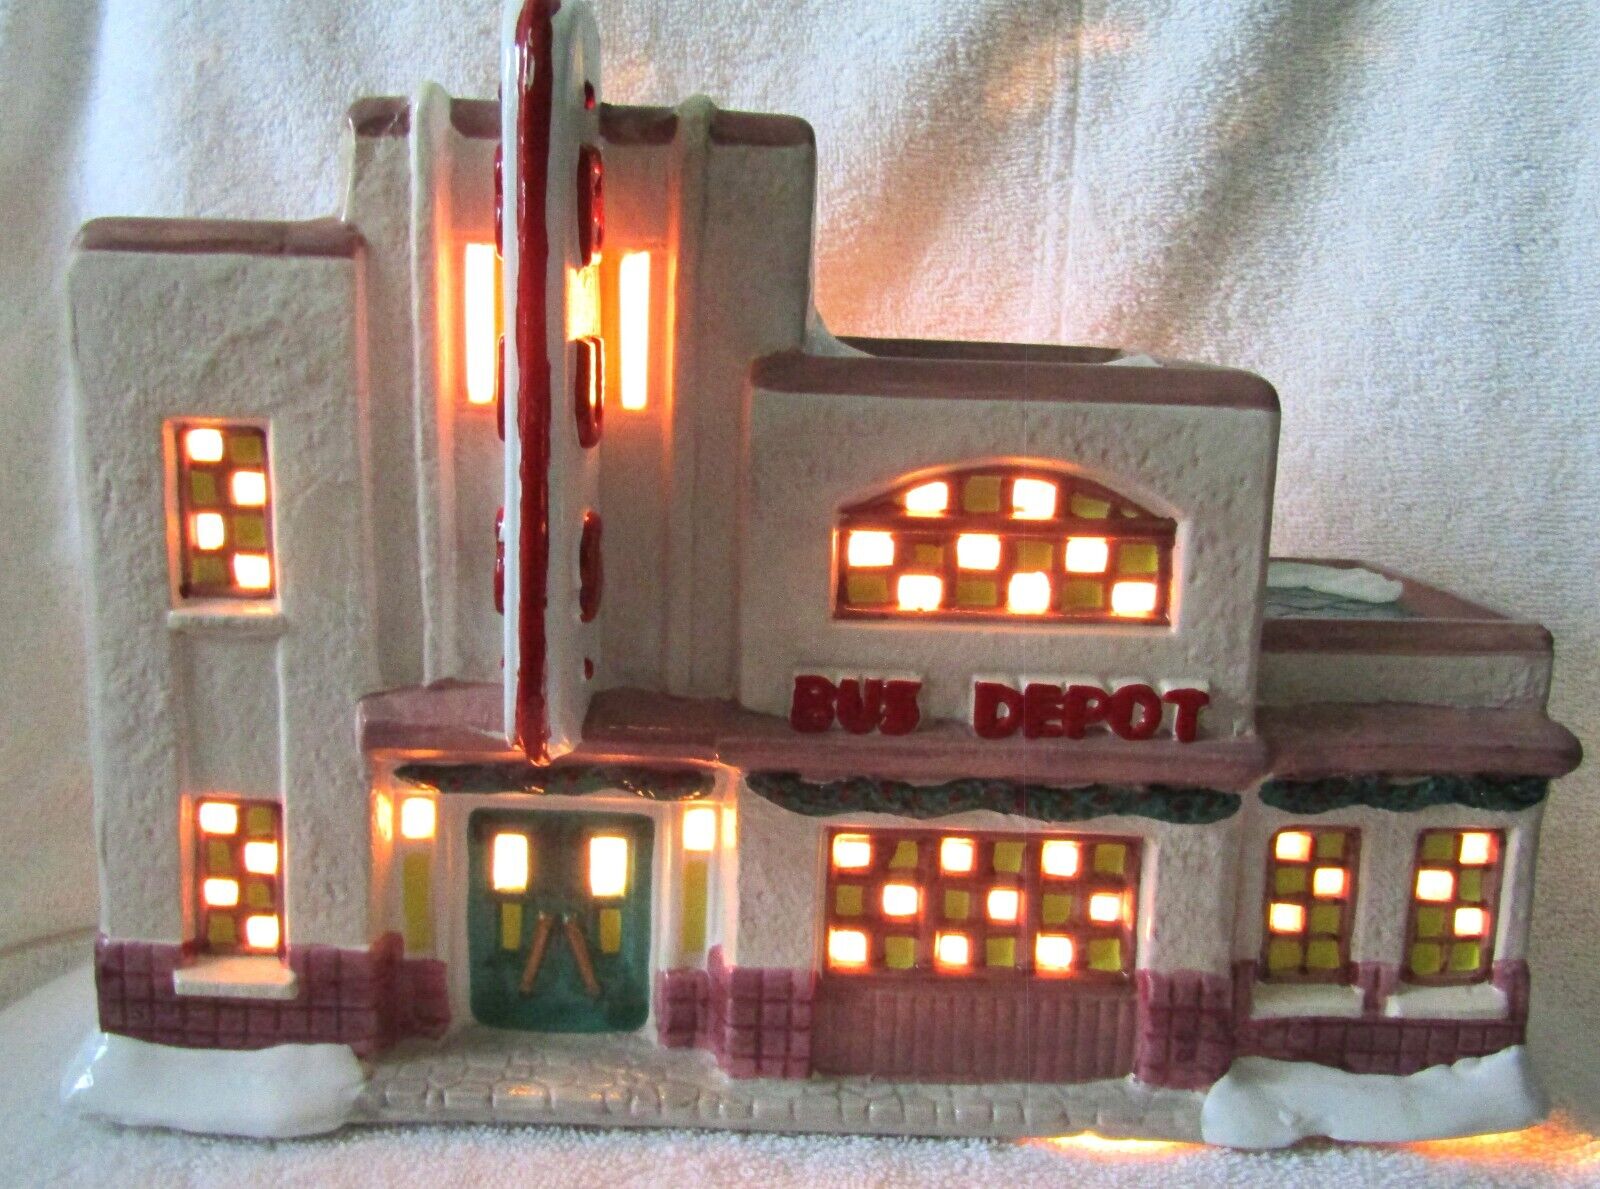 RARE 1993 Christmas Valley Collectible Seasonal Specialties Lighted Bus Depot